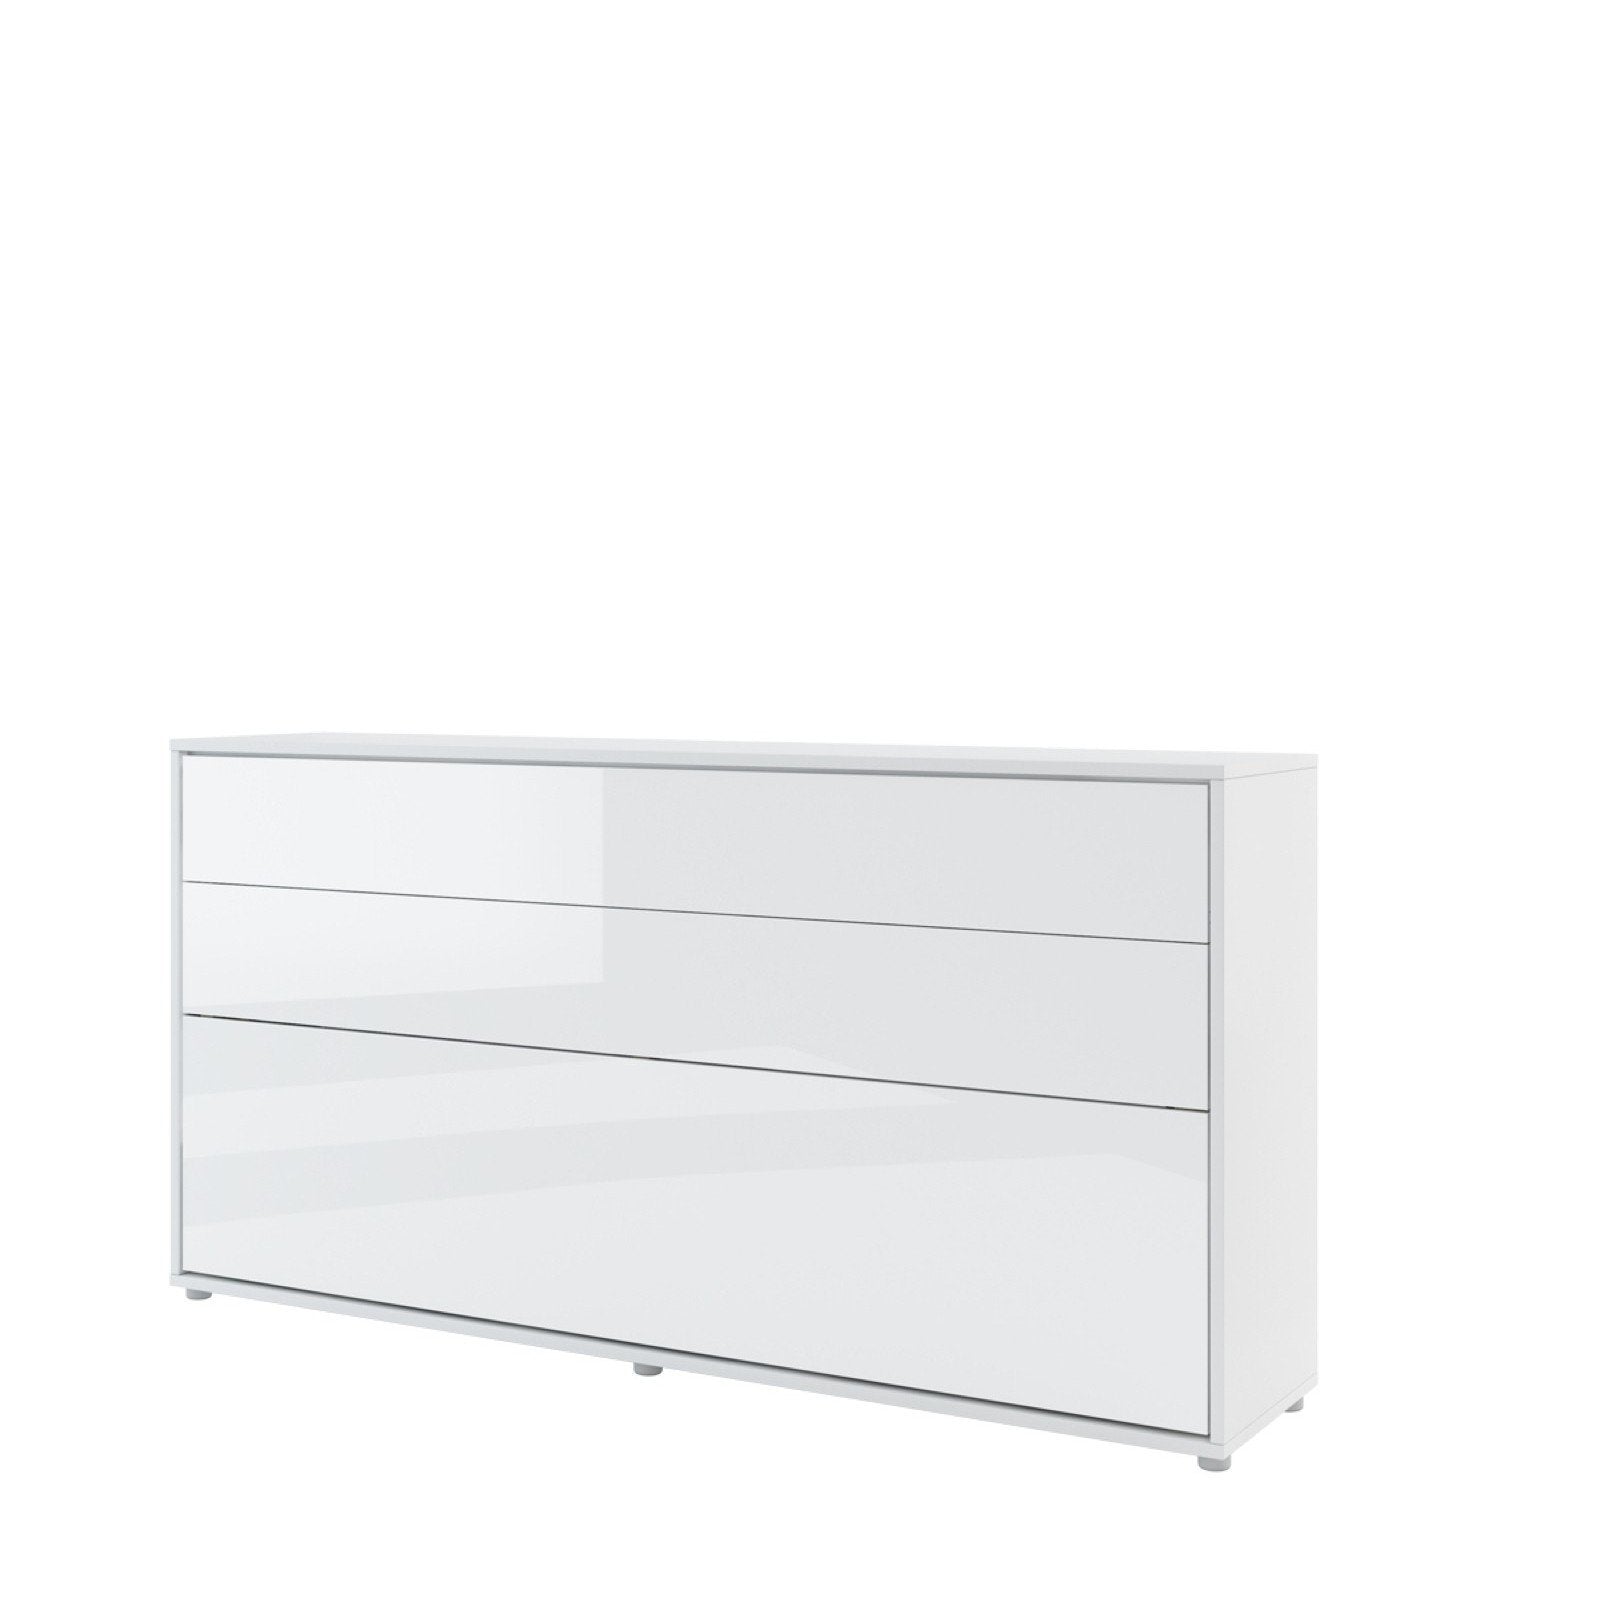 BC-06 Horizontal Wall Bed Concept 90cm White Gloss Wall Bed 